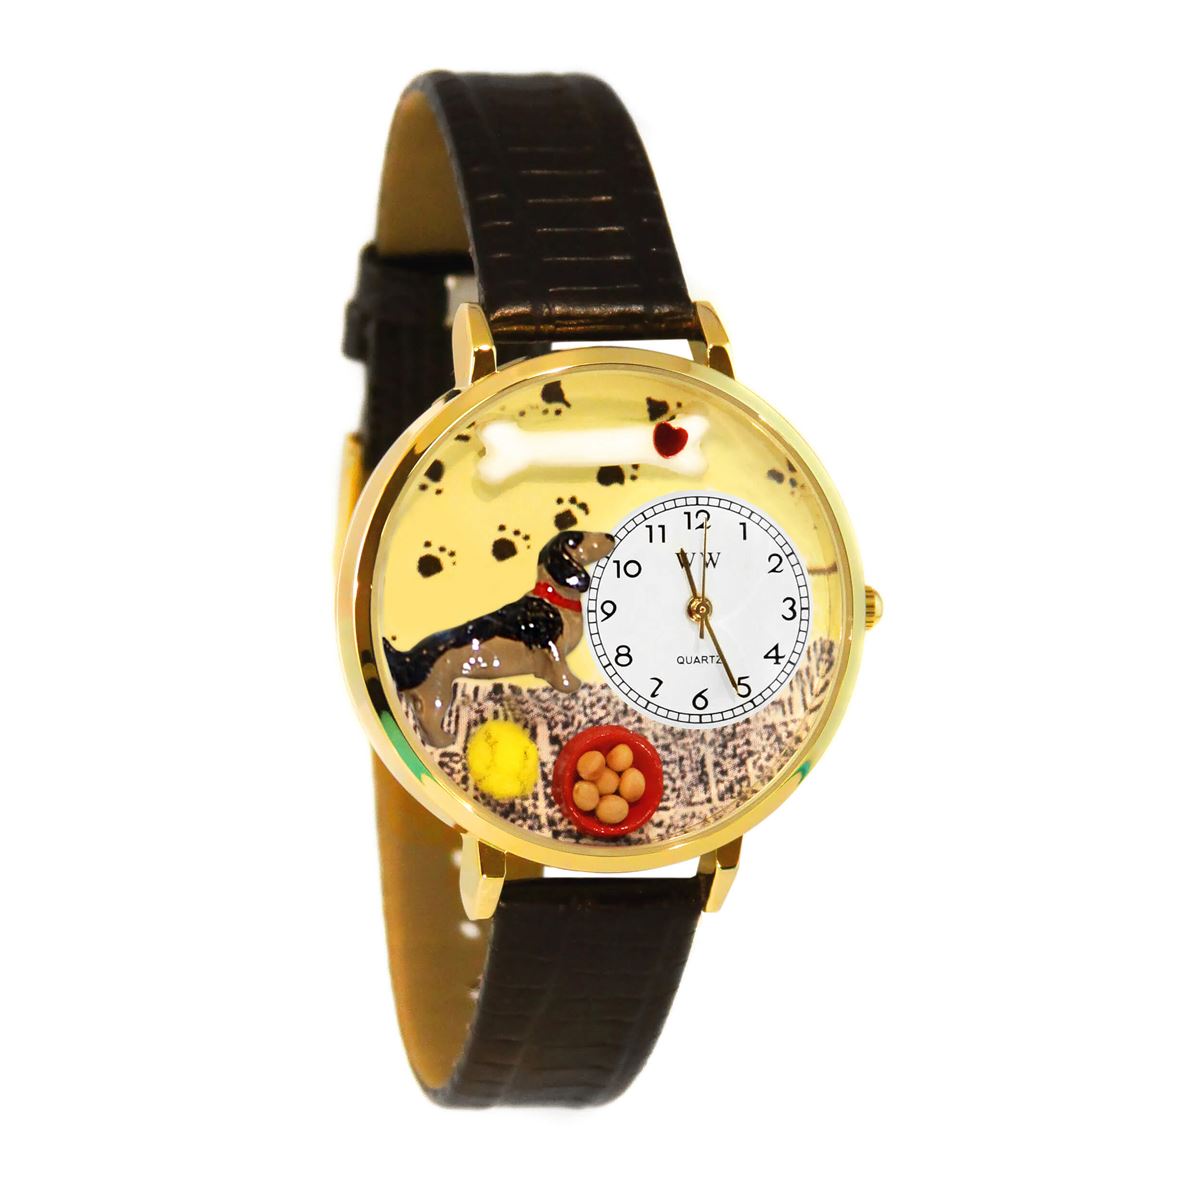 Whimsical Gifts | Dachshund 3D Watch Large Style | Handmade in USA | Animal Lover | Dog Lover | Novelty Unique Fun Miniatures Gift | Gold Finish Black Leather Watch Band